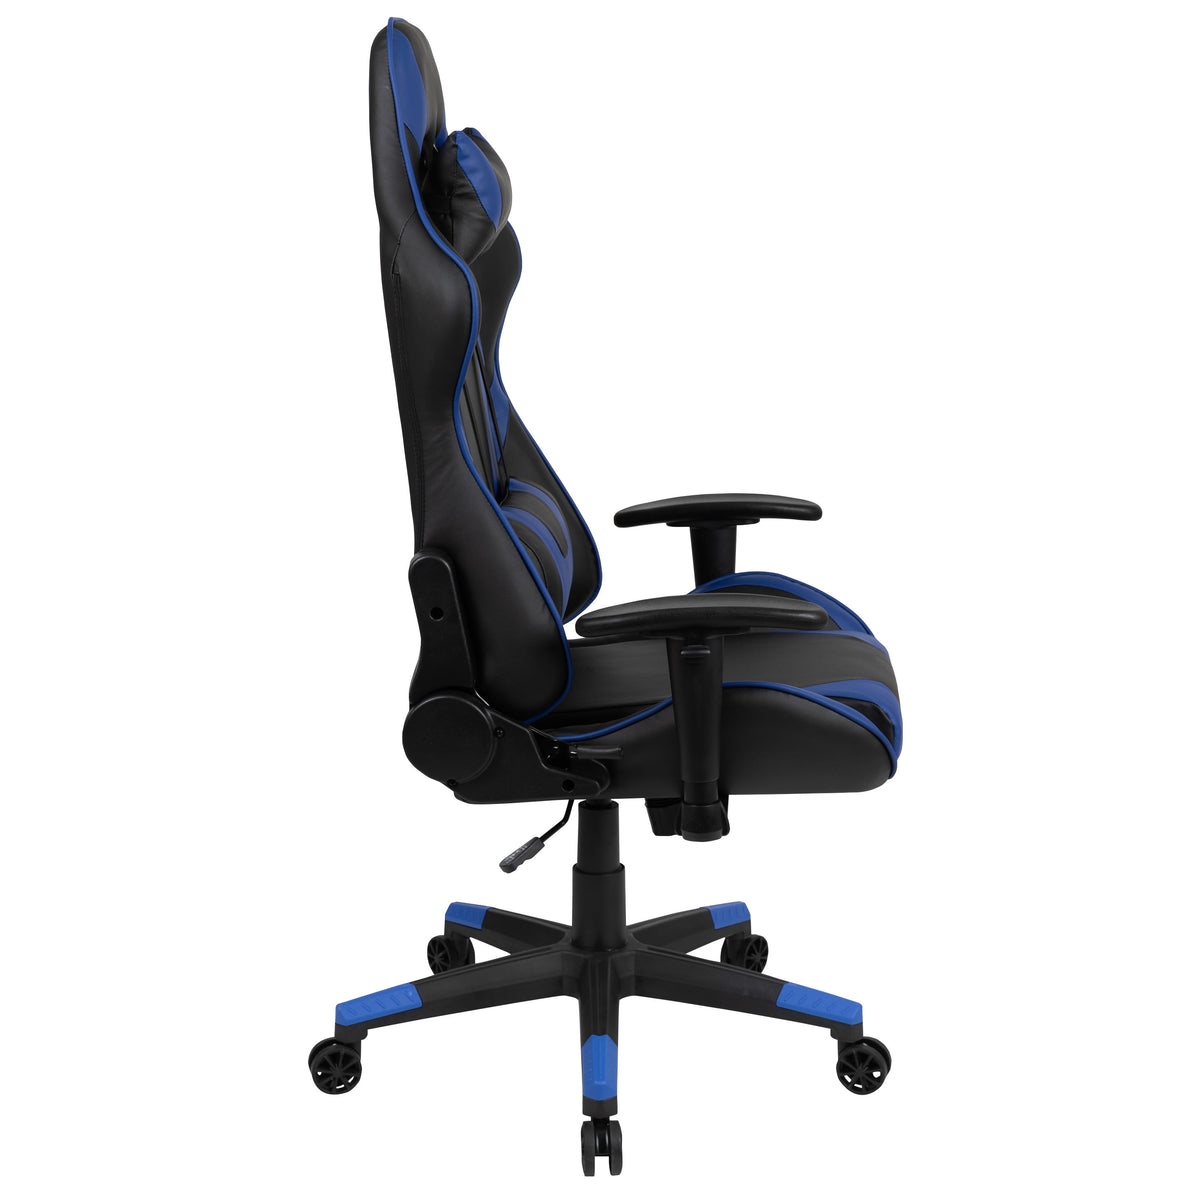 Blue |#| Reclining 360° Swivel Gamers Chair-Black & Blue Faux Leather - Adjustable Arms